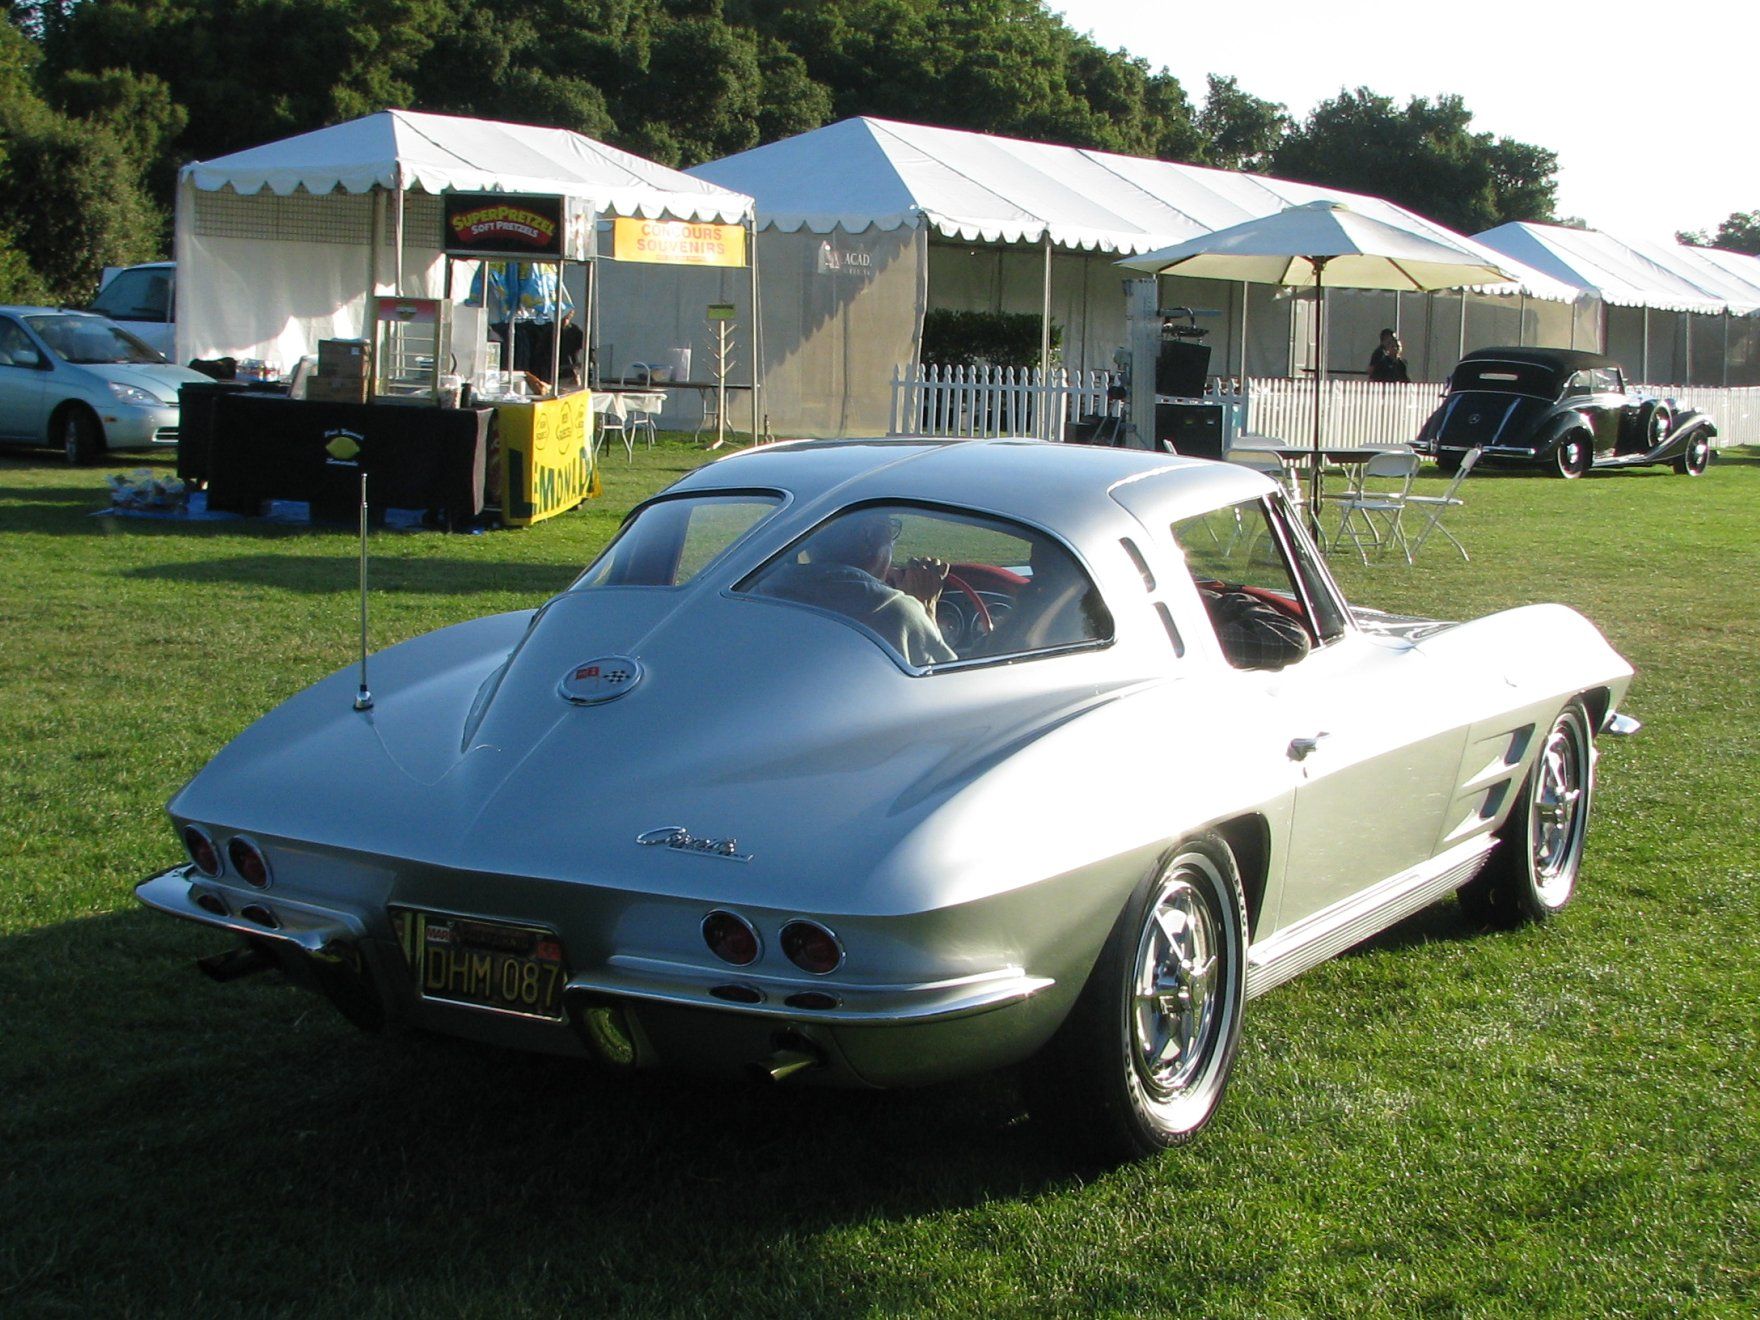 The rear of this Corvette shows off its split-window design.